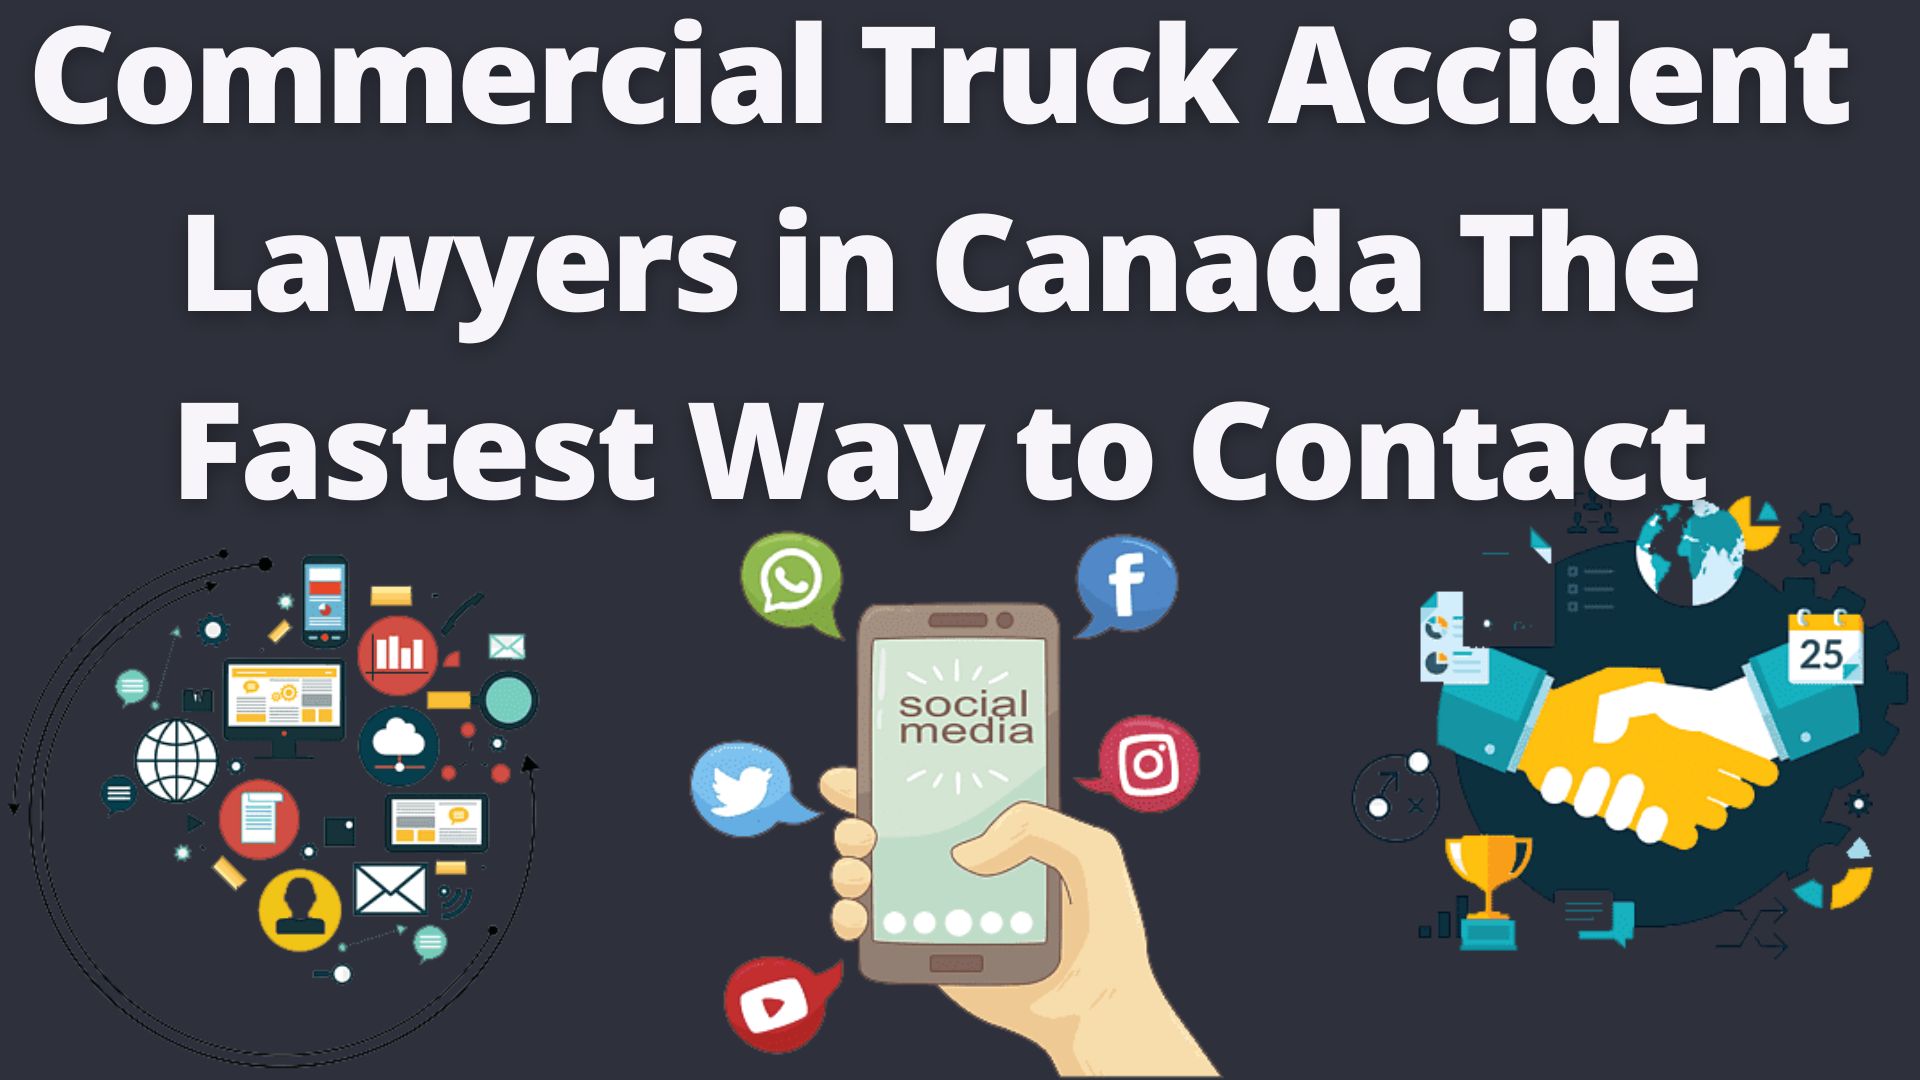 Commercial truck accident lawyers in canada the fastest way to contact